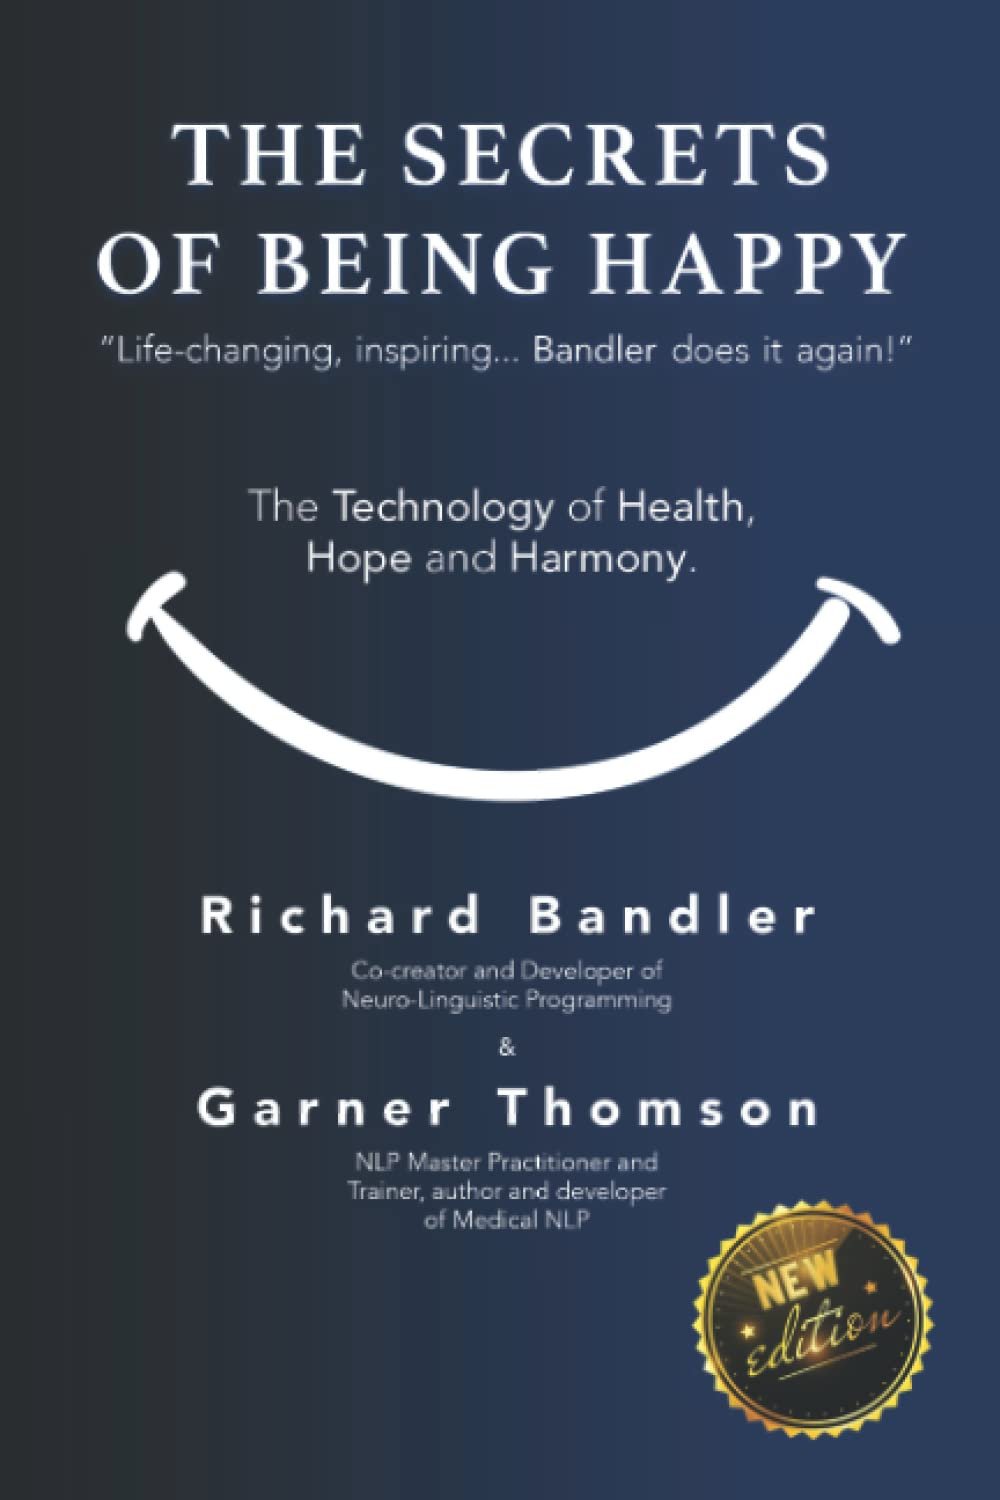 The Secrets of Being Happy